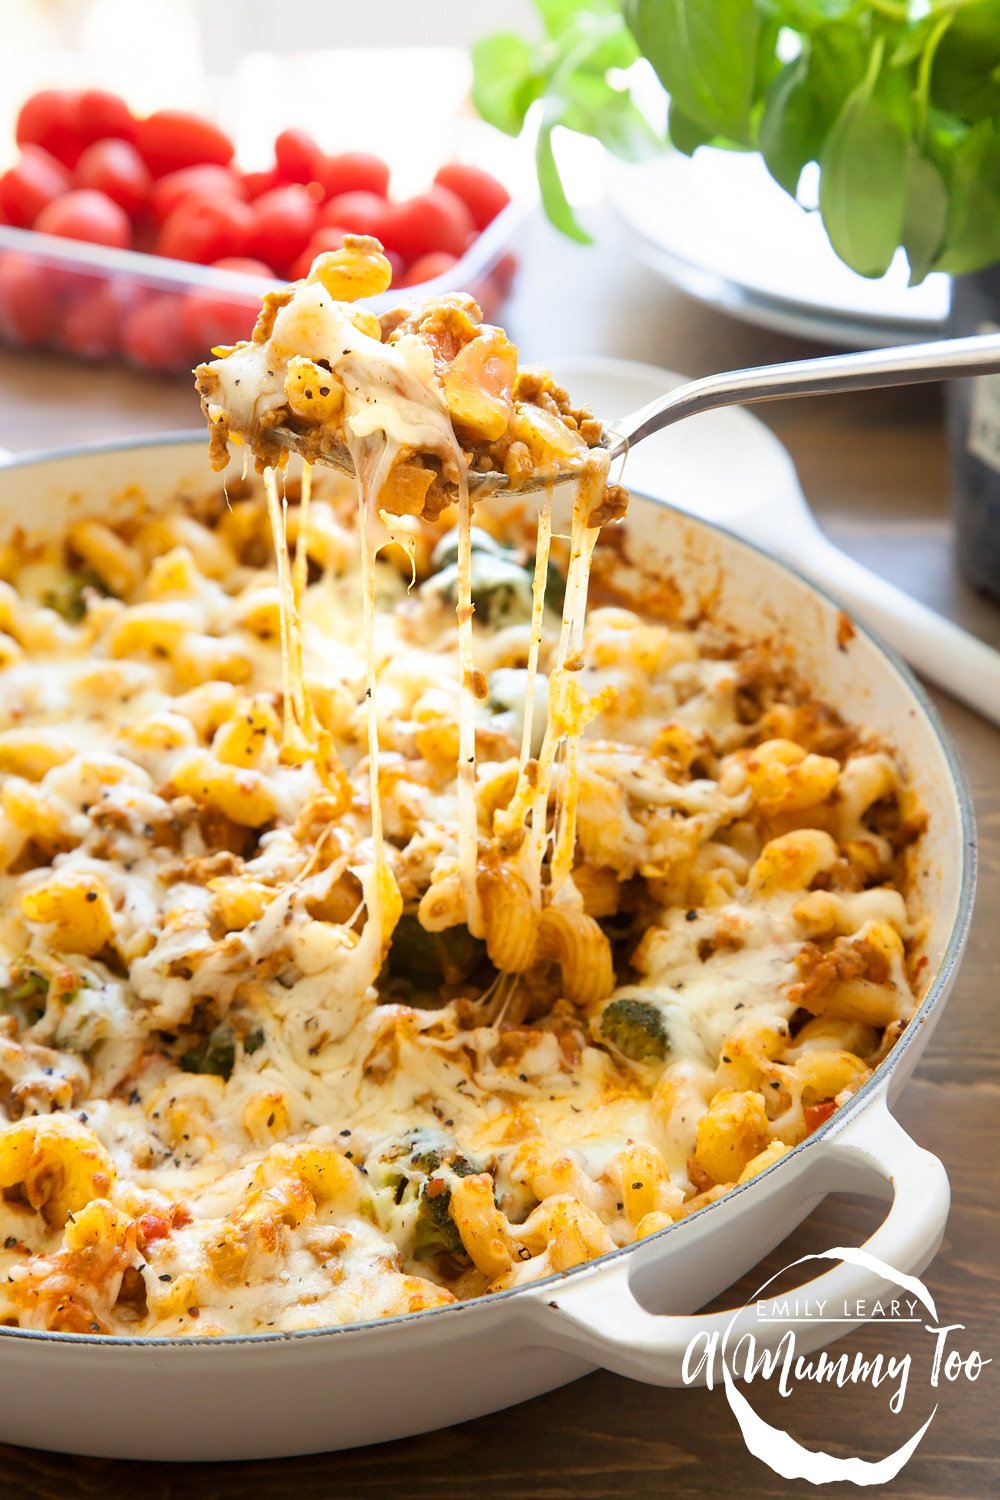 This chunky keema pasta bake is wonderfully filling and lightly spiced